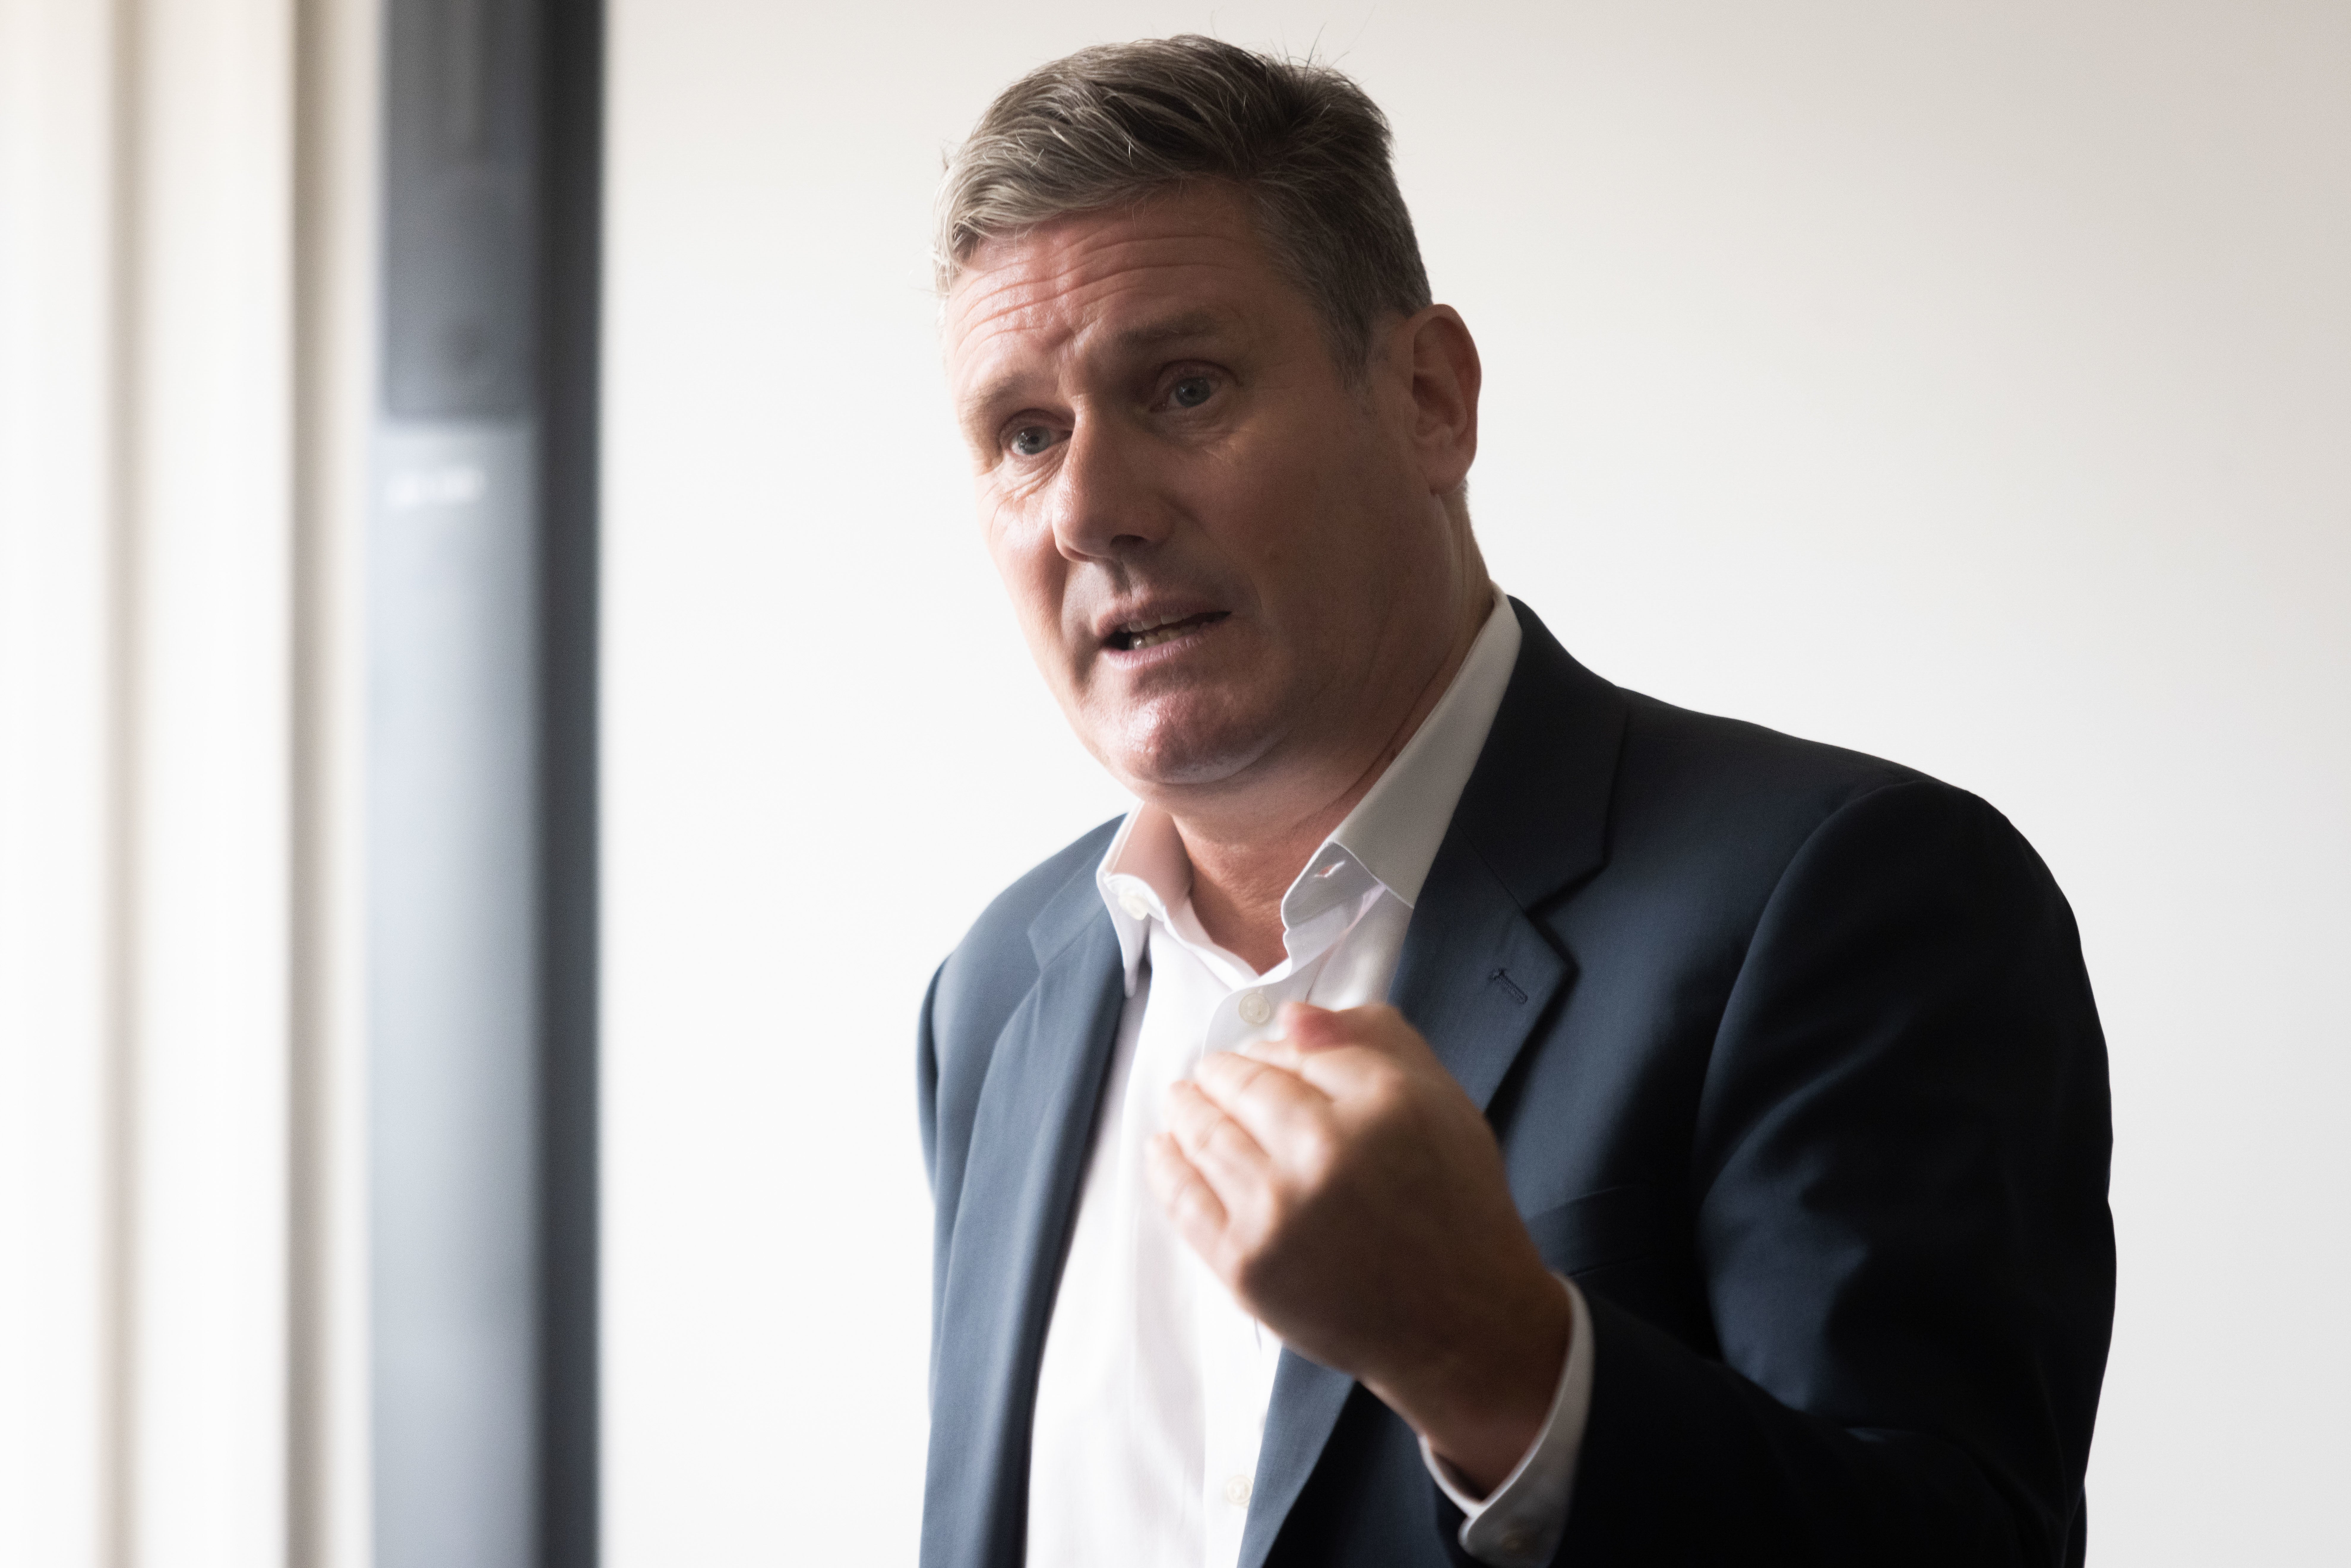 Labour leader Sir Keir Starmer vows to double onshore wind energy by 2030